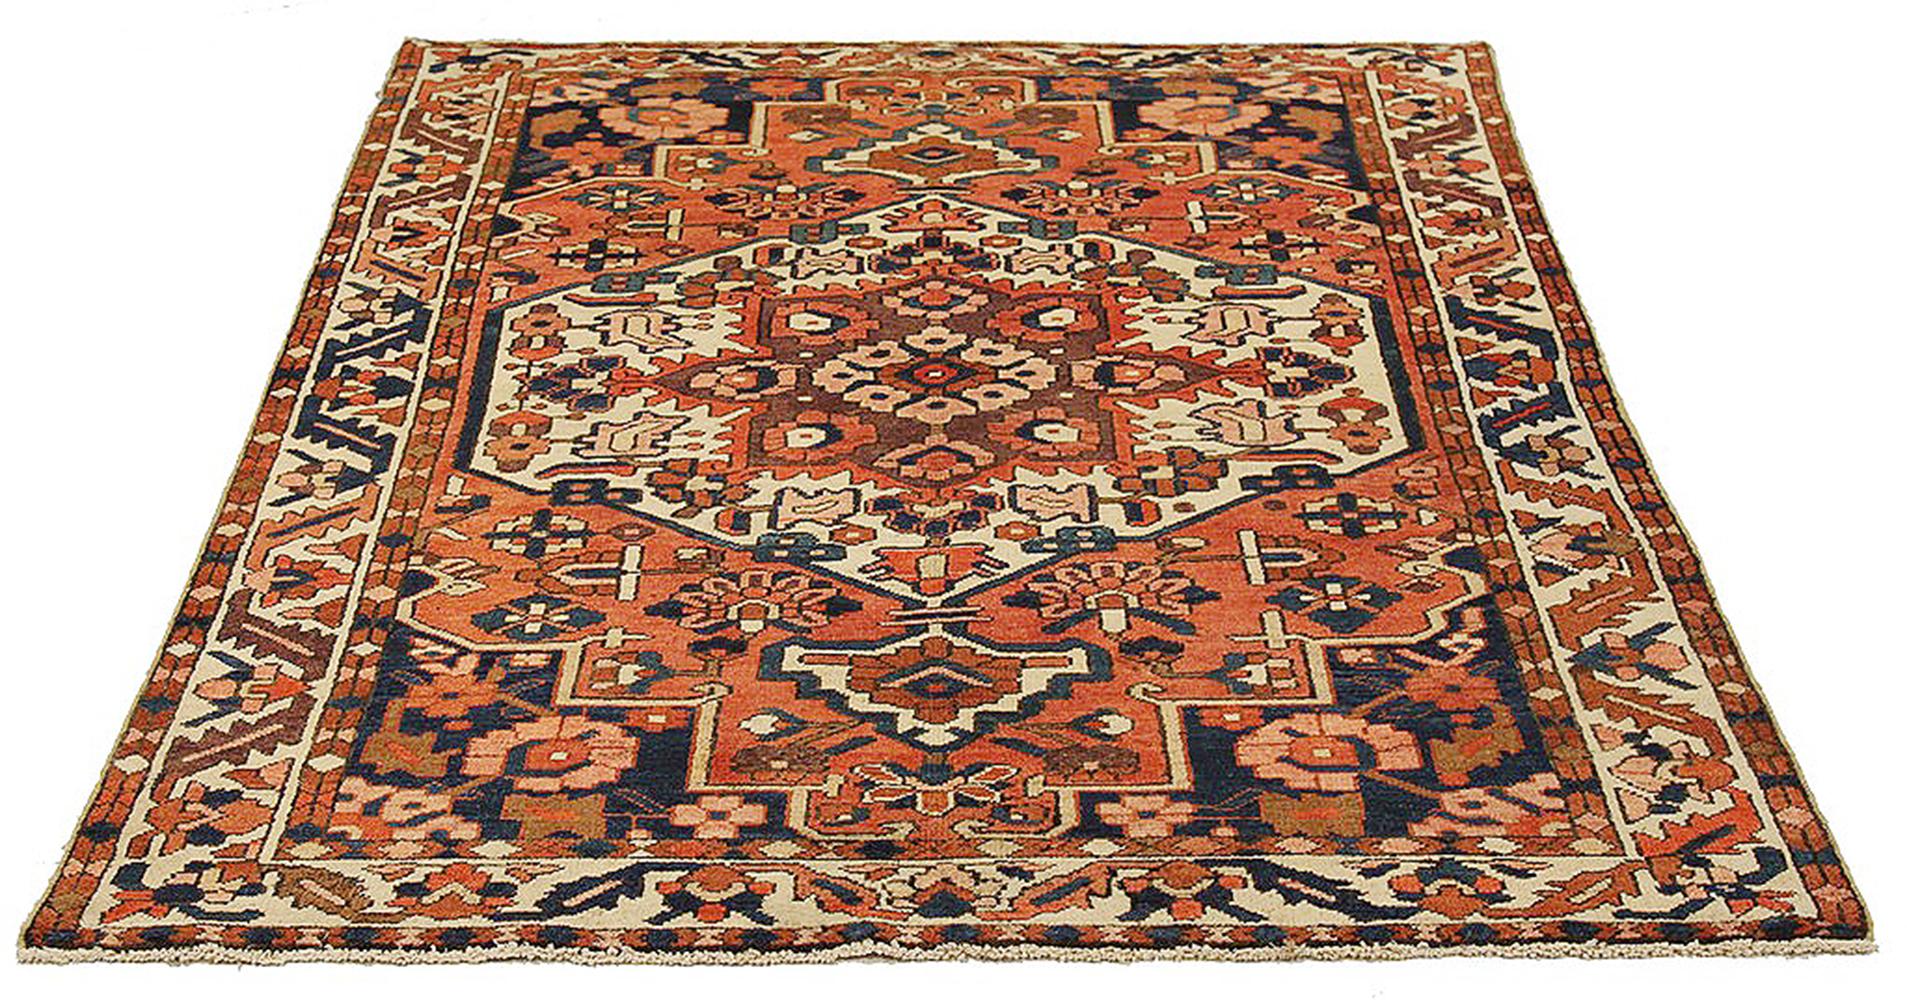 Antique Persian rug handwoven from the finest sheep’s wool and colored with all-natural vegetable dyes that are safe for humans and pets. It’s a traditional Bakhtiar design highlighted by flower portrait details over an ivory field. It’s a beautiful